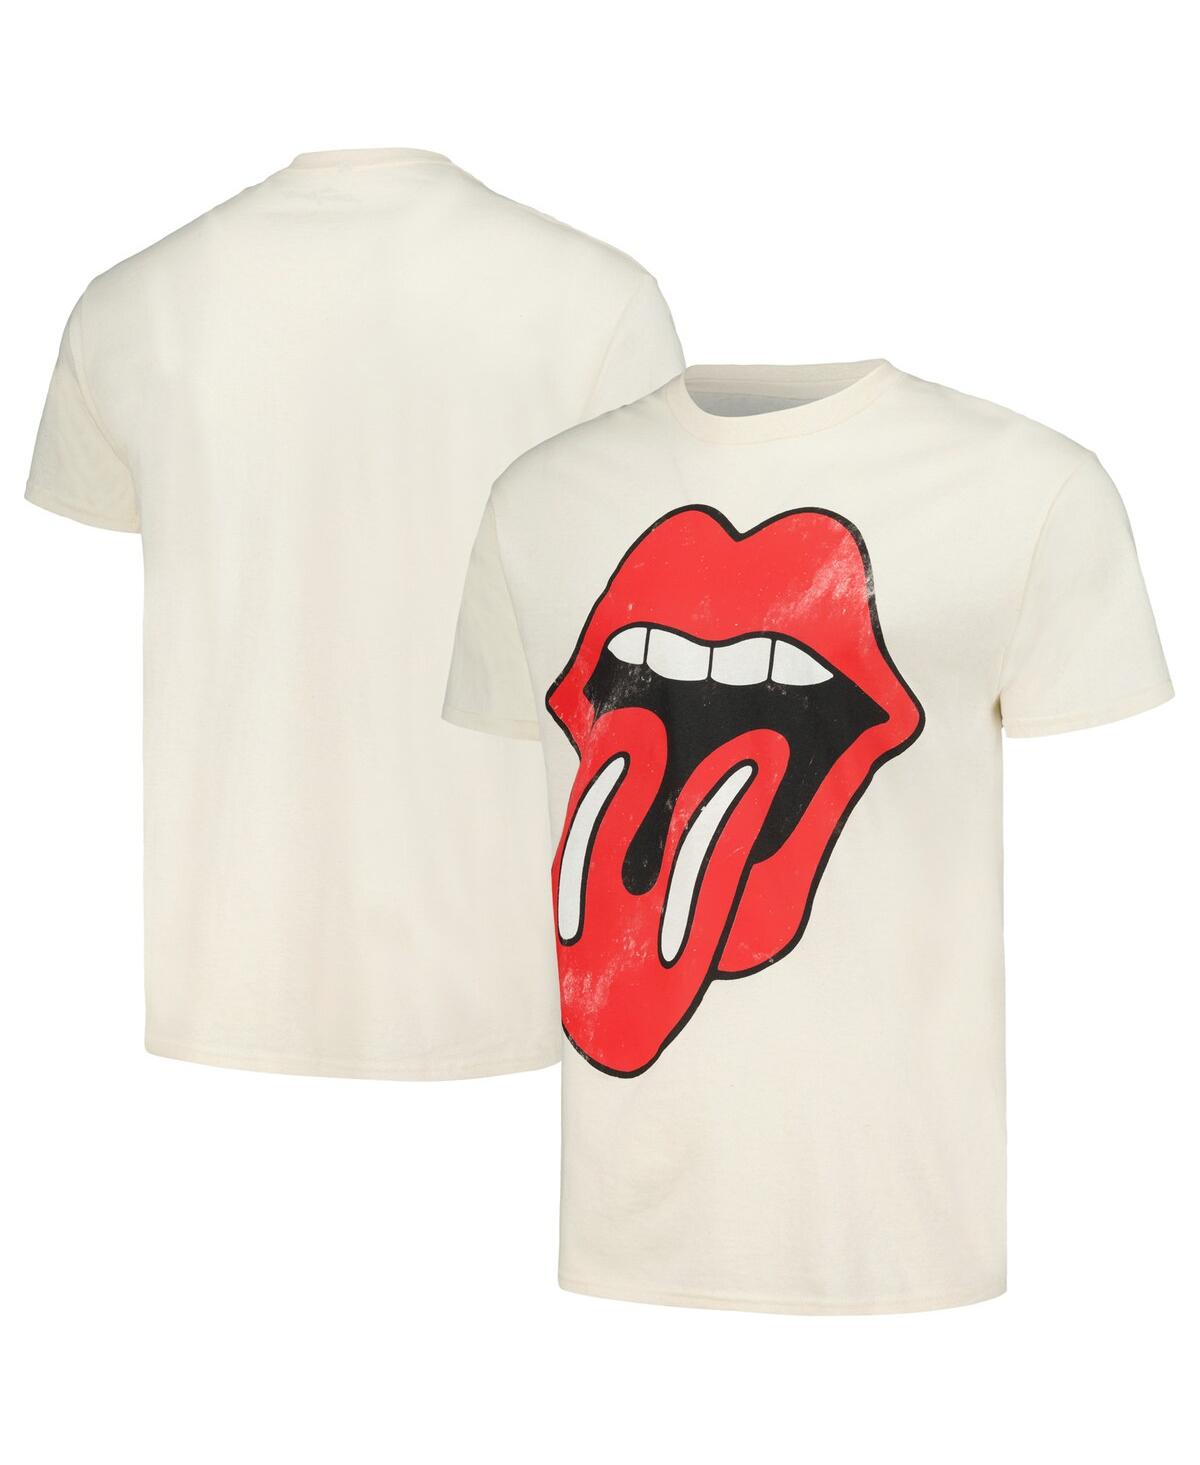 Men's and Women's Cream Rolling Stones Evolution and Lonesome Blue T-shirt - Cream